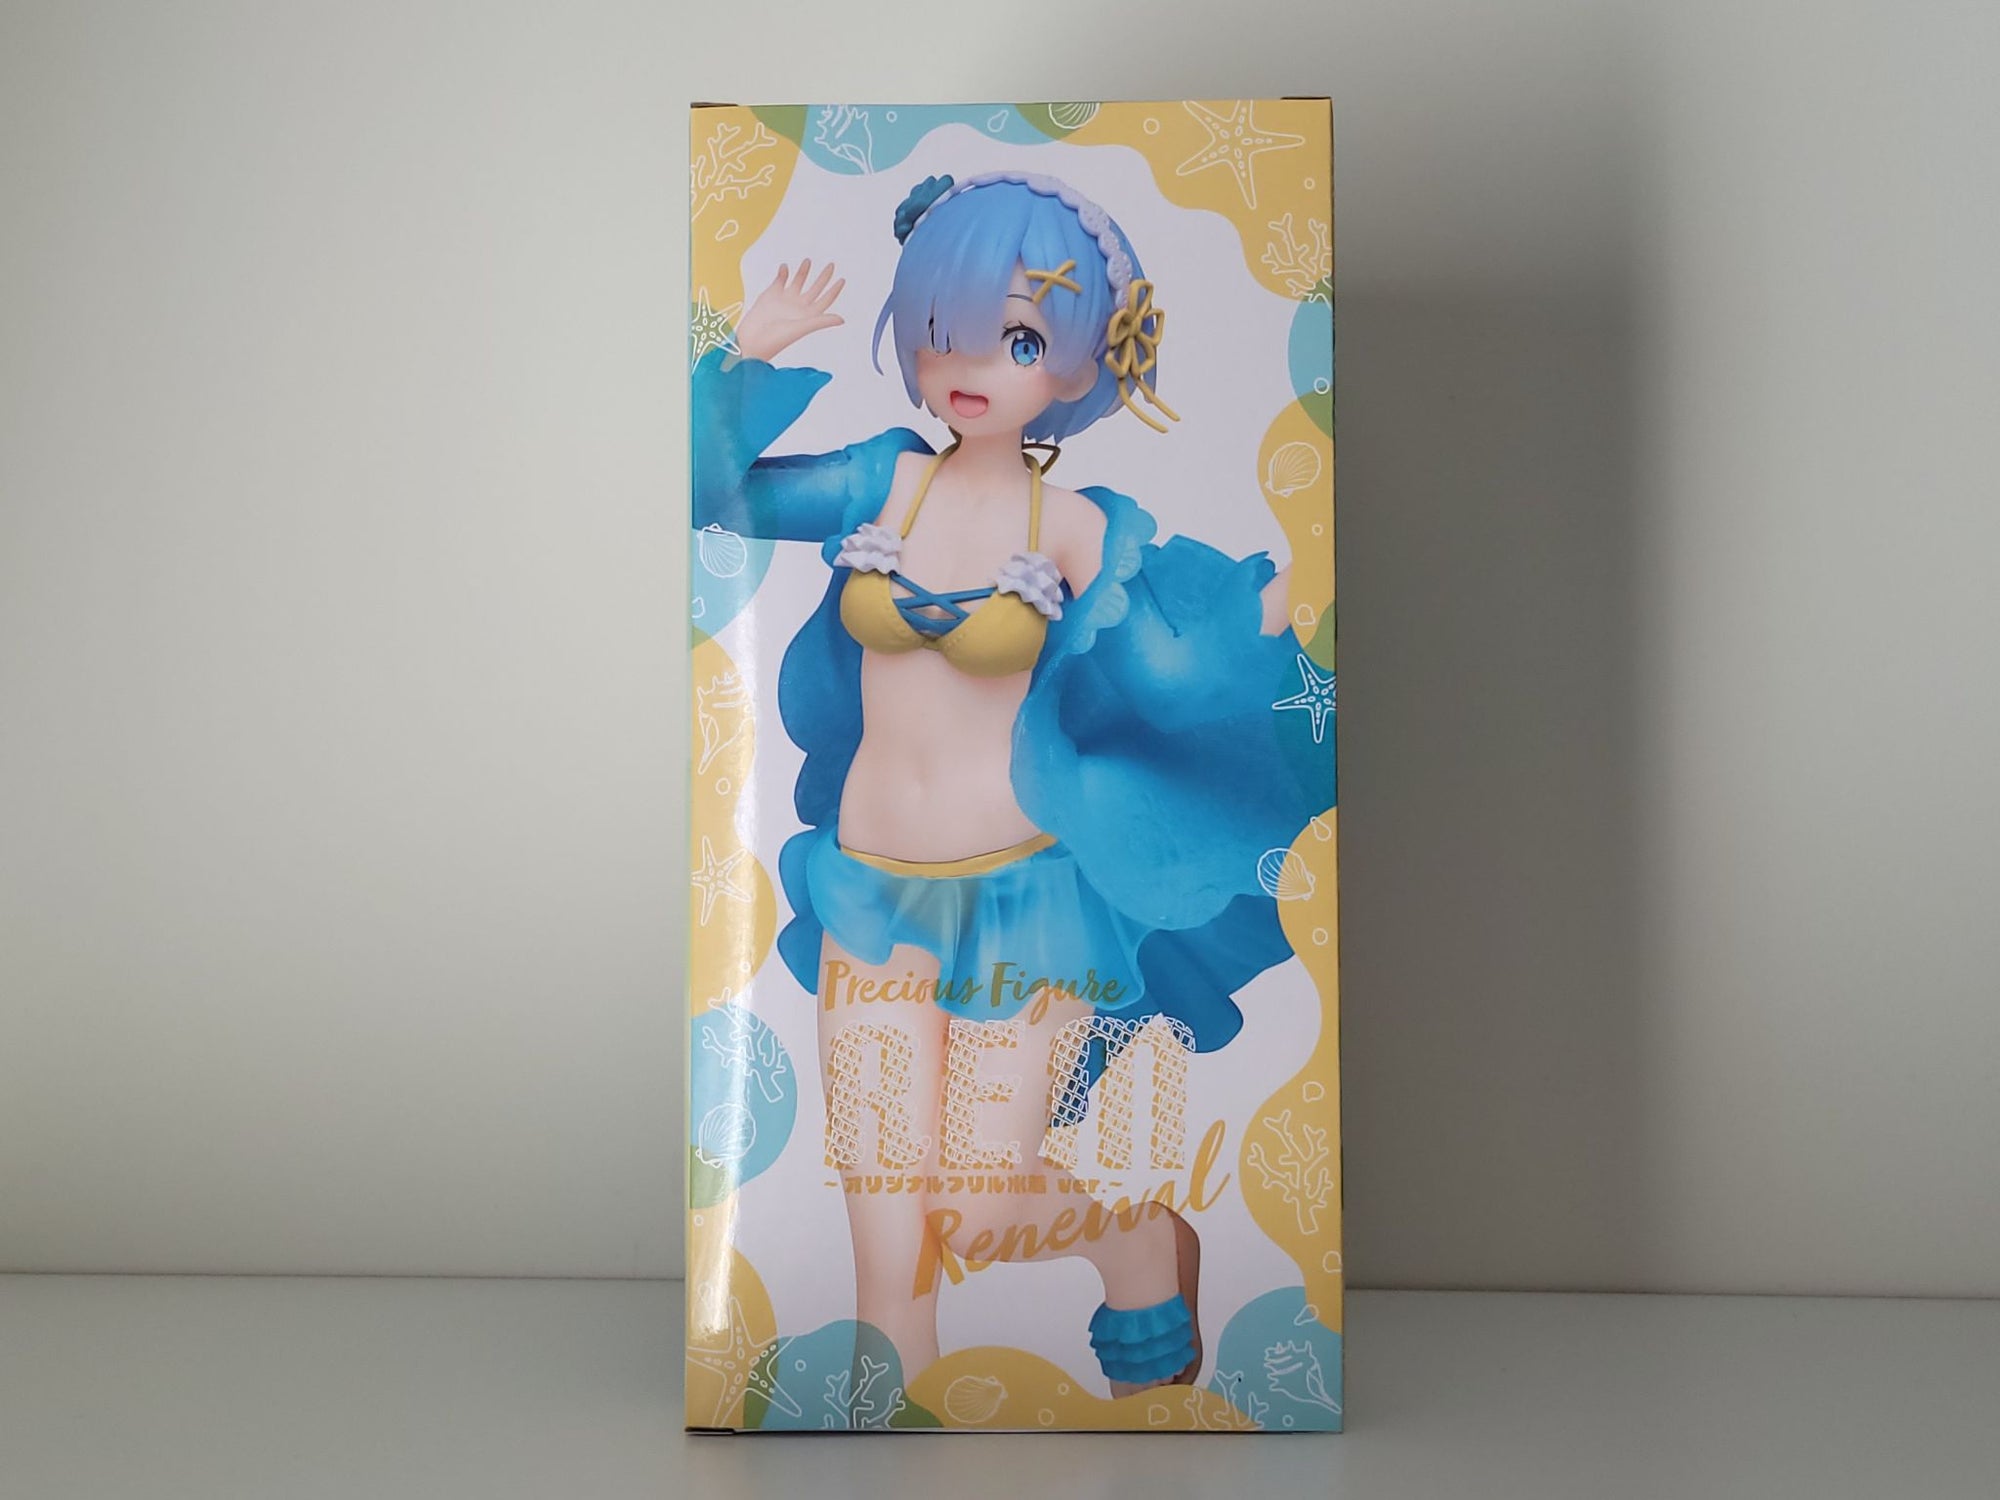 Re:Zero Starting Life in Another World - Rem Swimsuit Figure - 1